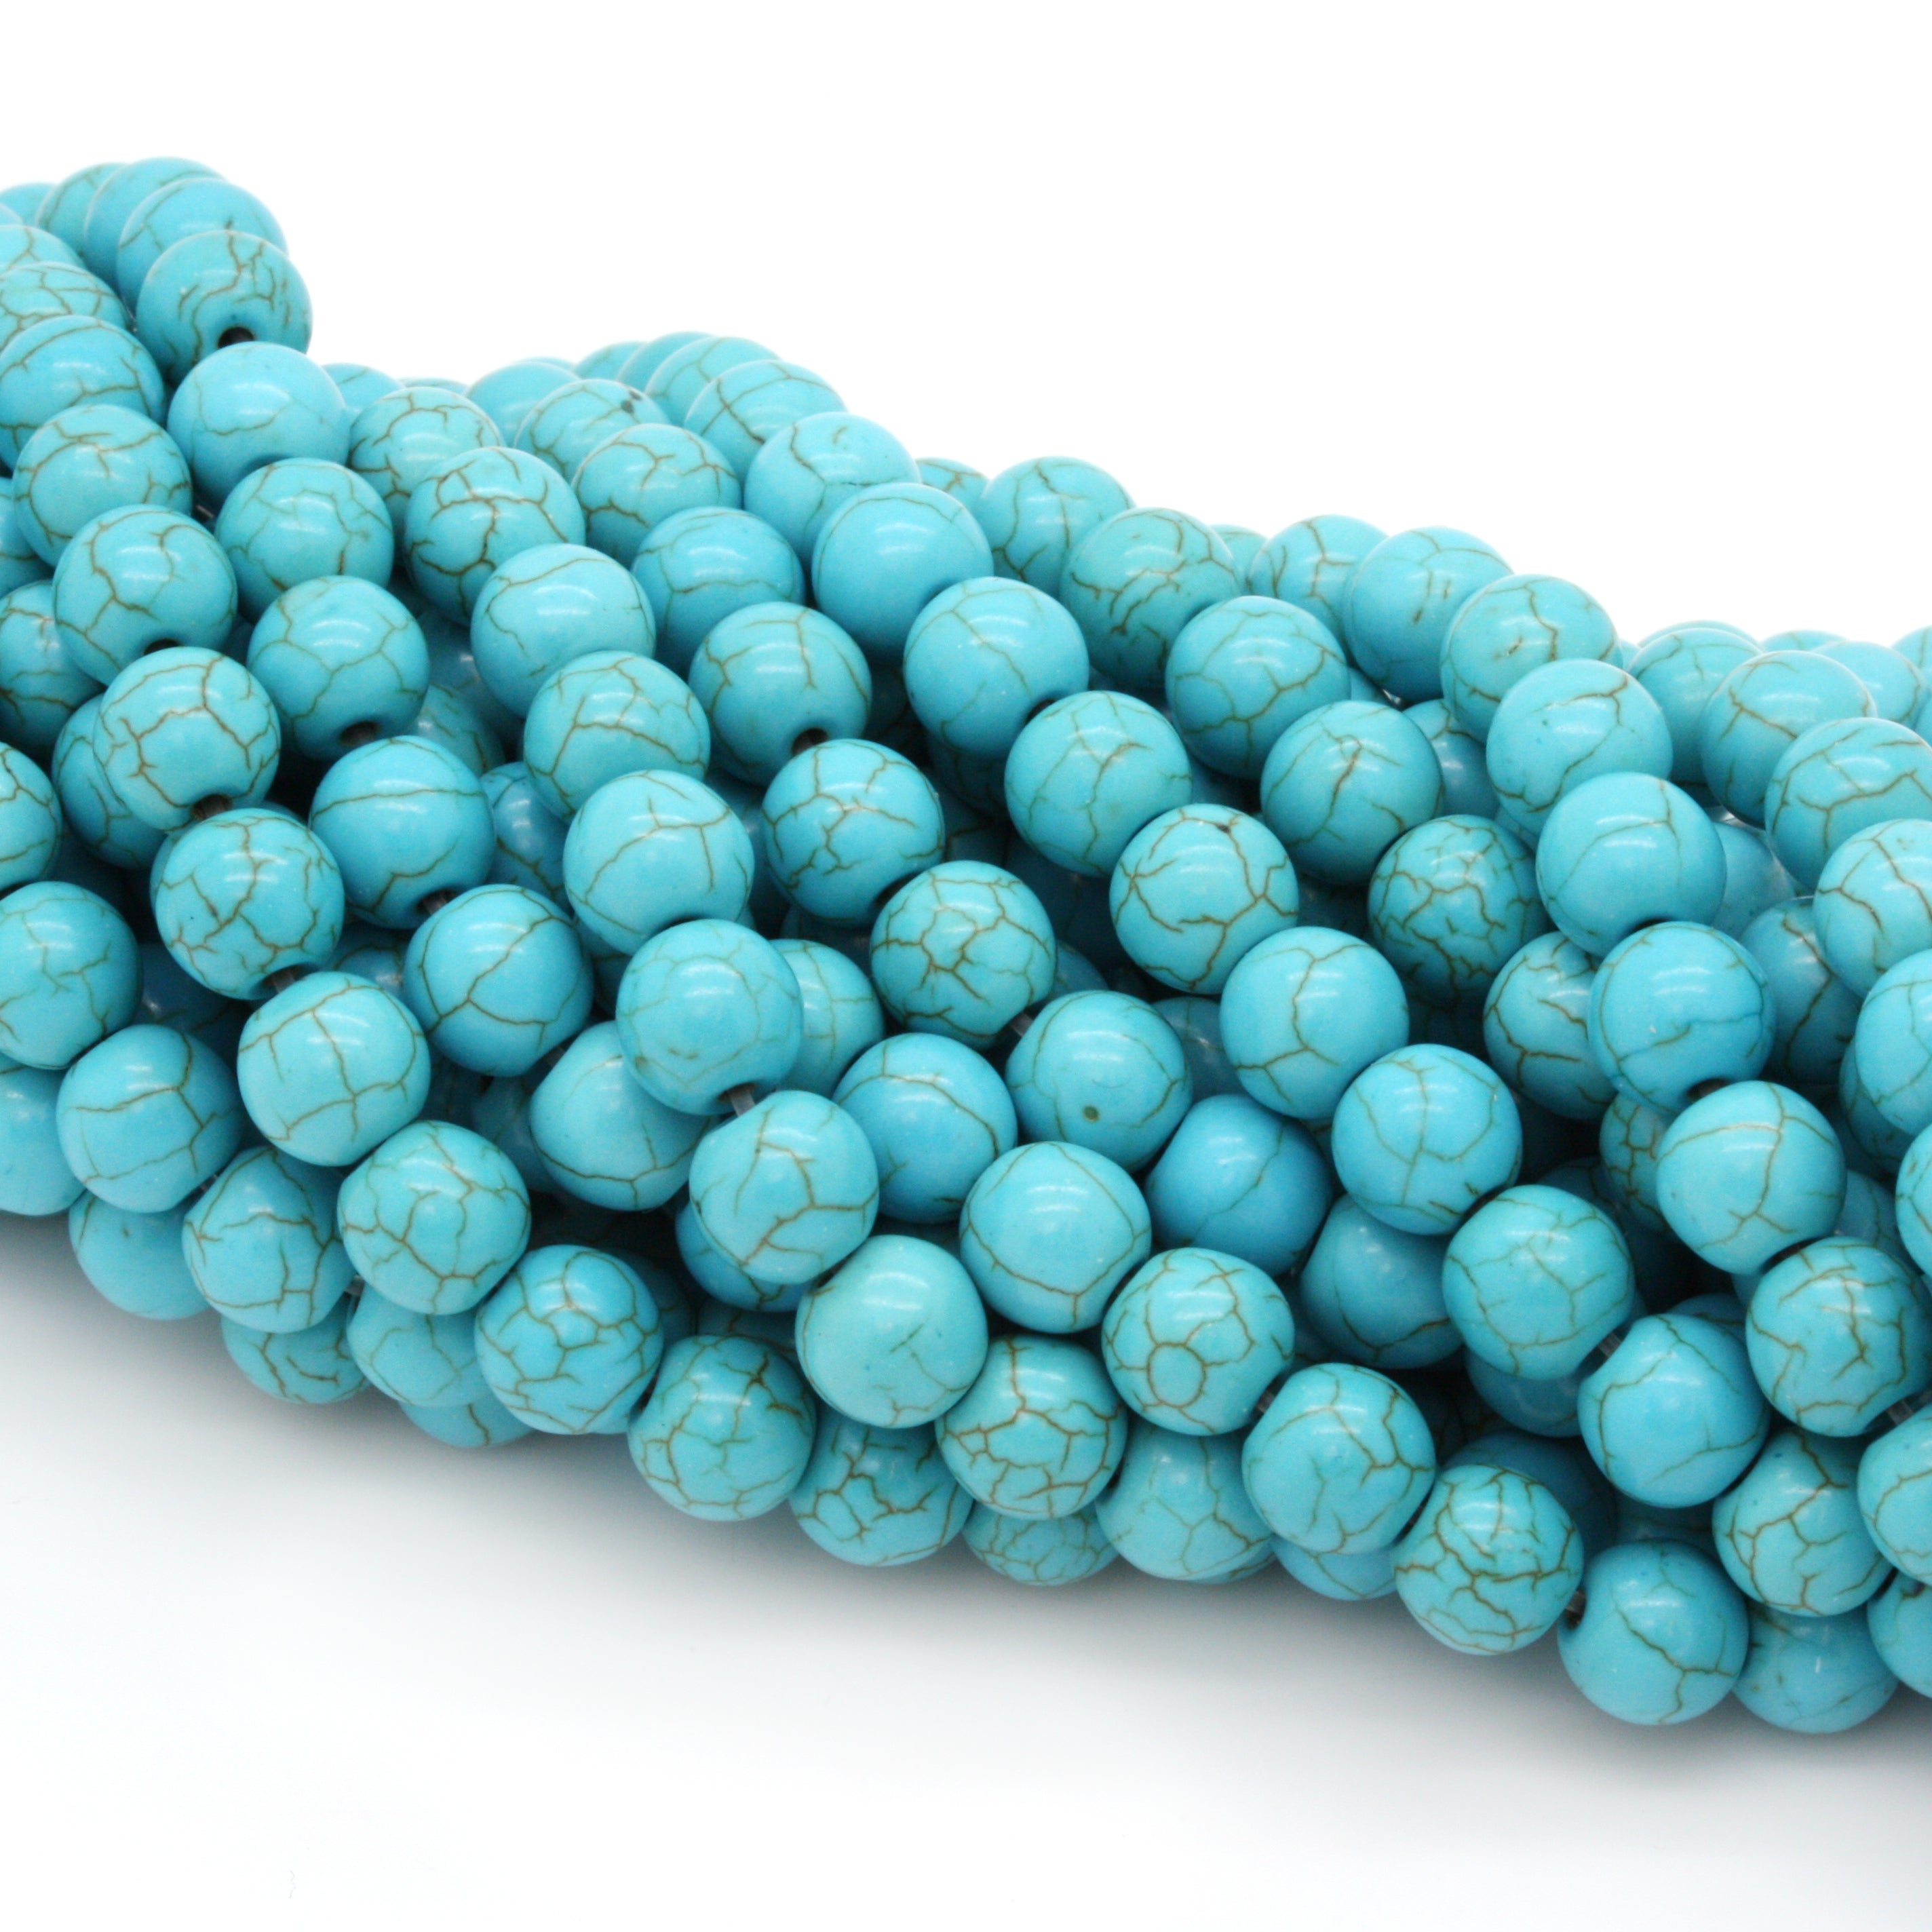 Synthetic Turquoise Round Beads 8mm - 35cm Strand